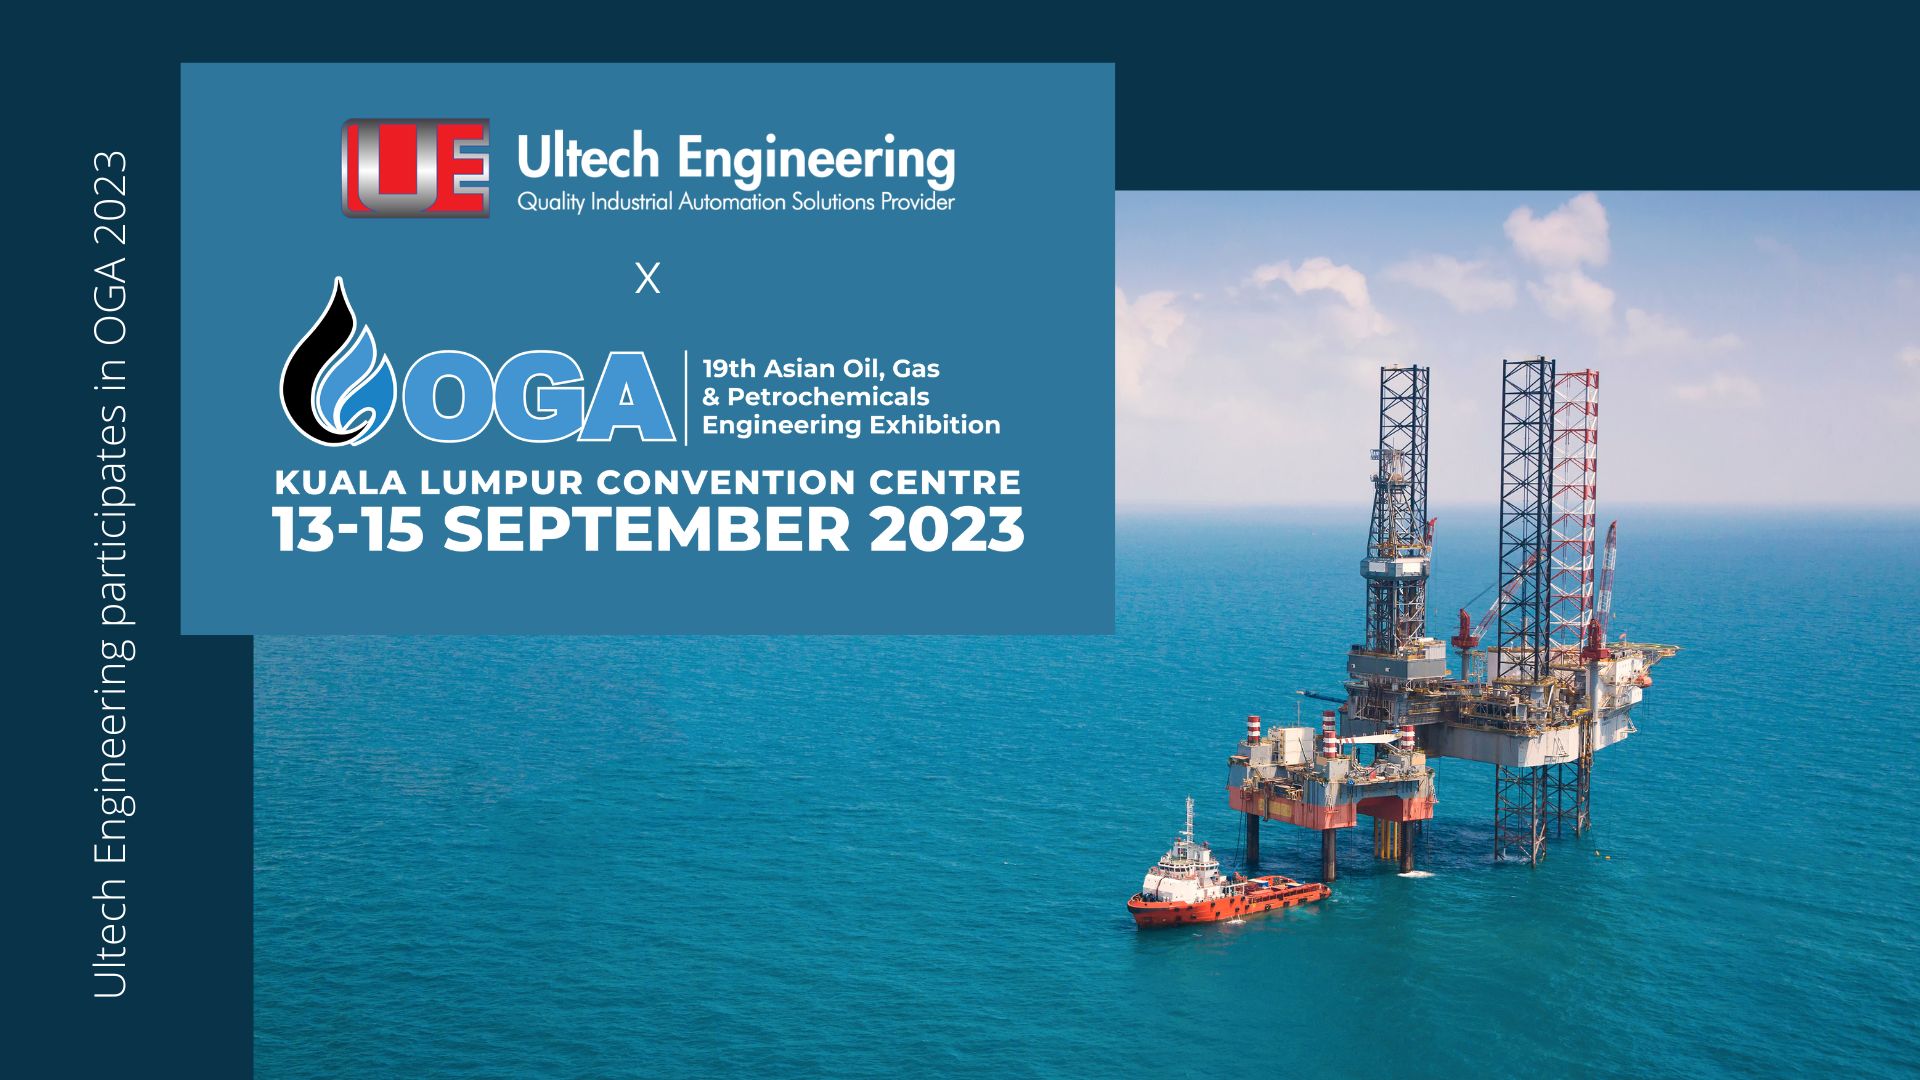 Join us at the Largest Oil and Gas Conference of the Year! Ultech